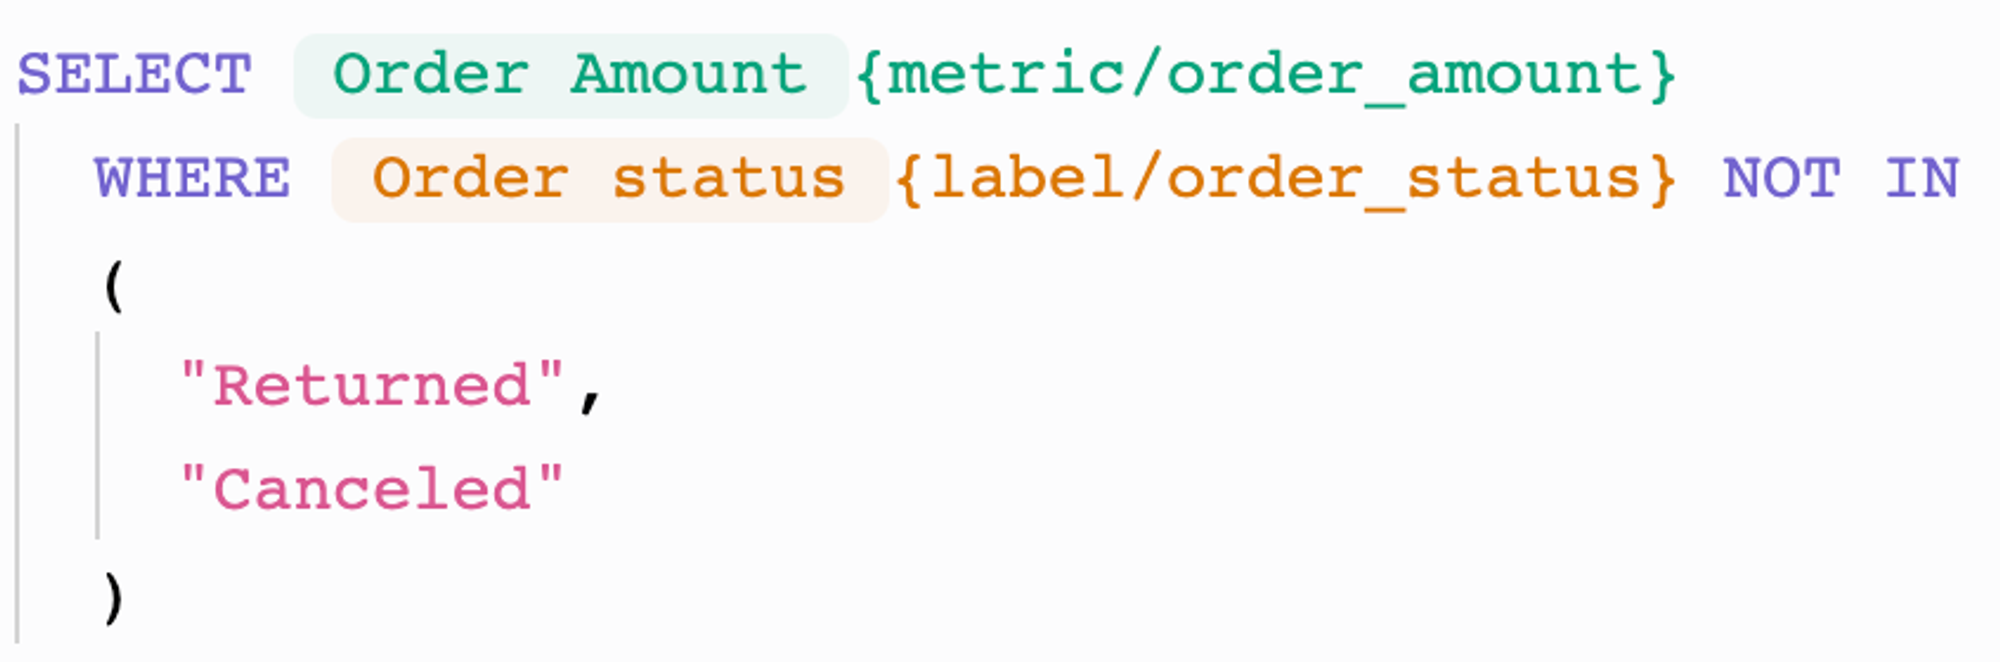 Definition of Revenue metric using GoodData's Analytical Query Language (MAQL).